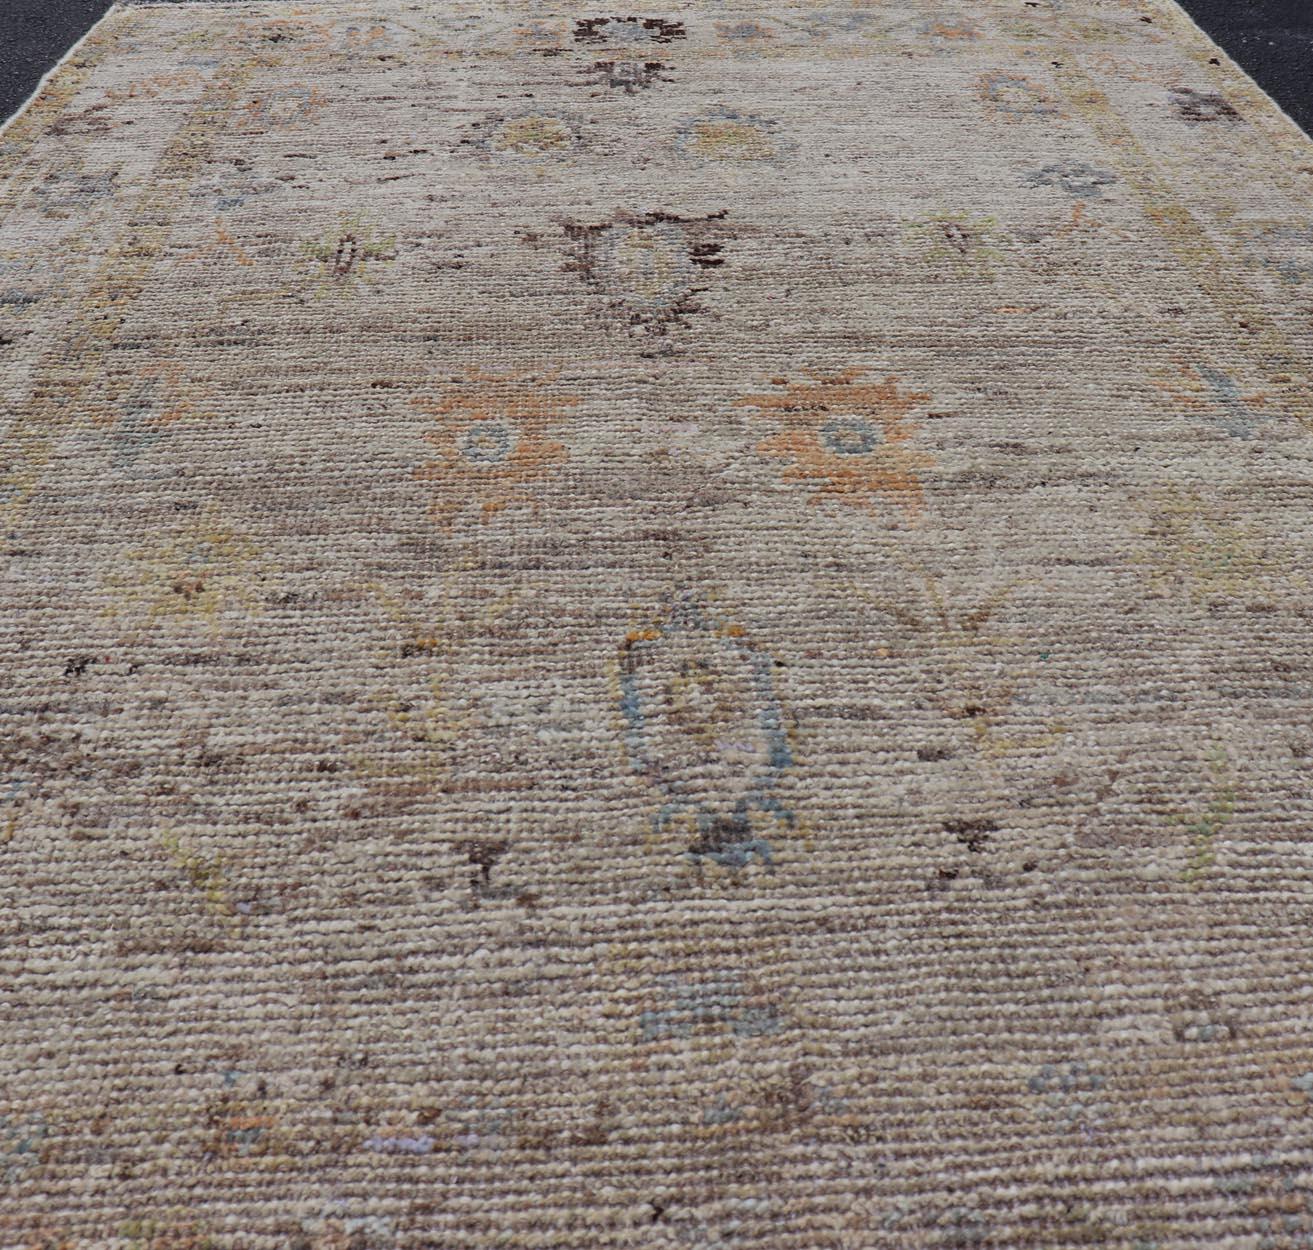 Modern Distressed Oushak With All-Over Floral Design on Cream Field and Border. Keivan Woven Arts/ rug /AFG-65734 Country of Origin: Afghanistan Type: Oushak Design: Floral, All-Over, Arabesque-Floral 21st century. 
Measures: 3'9 x 5'8 
Modern